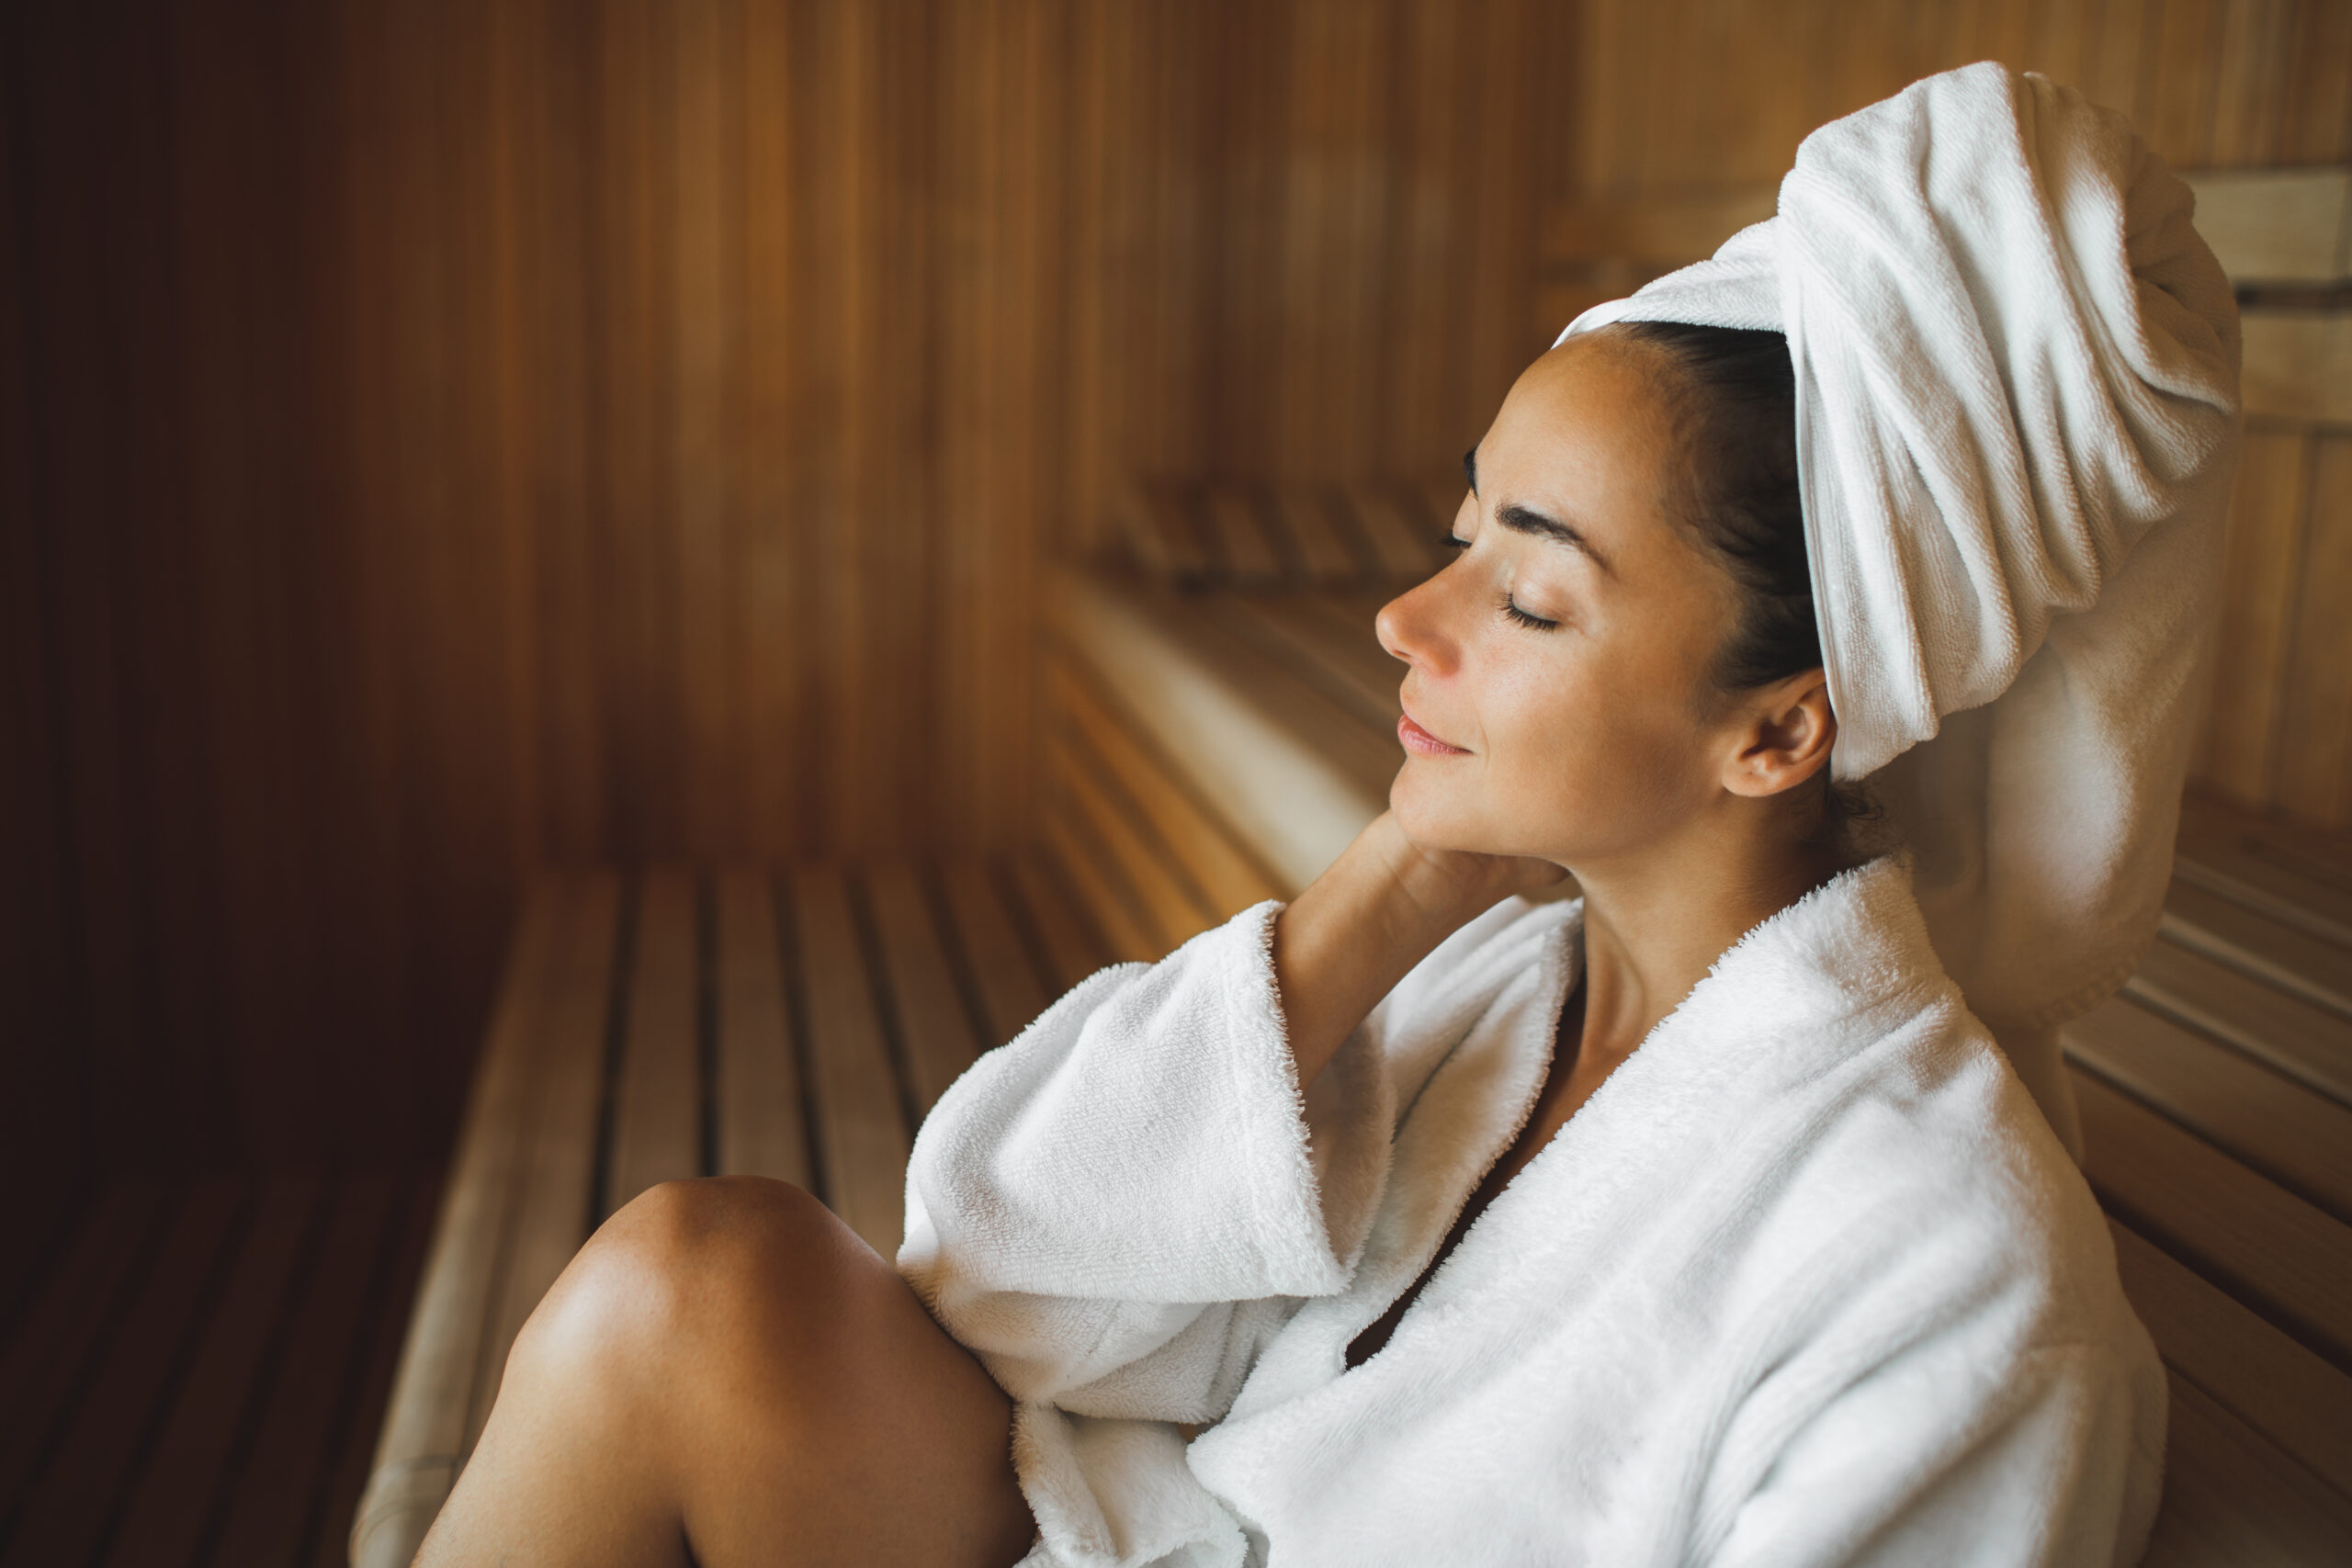 Young beautiful slim woman in wooden dry sauna in spa centr in white bathrobe with towel on her head. Relaxation wellness and beauty concept. Finnish sauna for strengthening the body's immune system, removing toxins, resting body and mind.